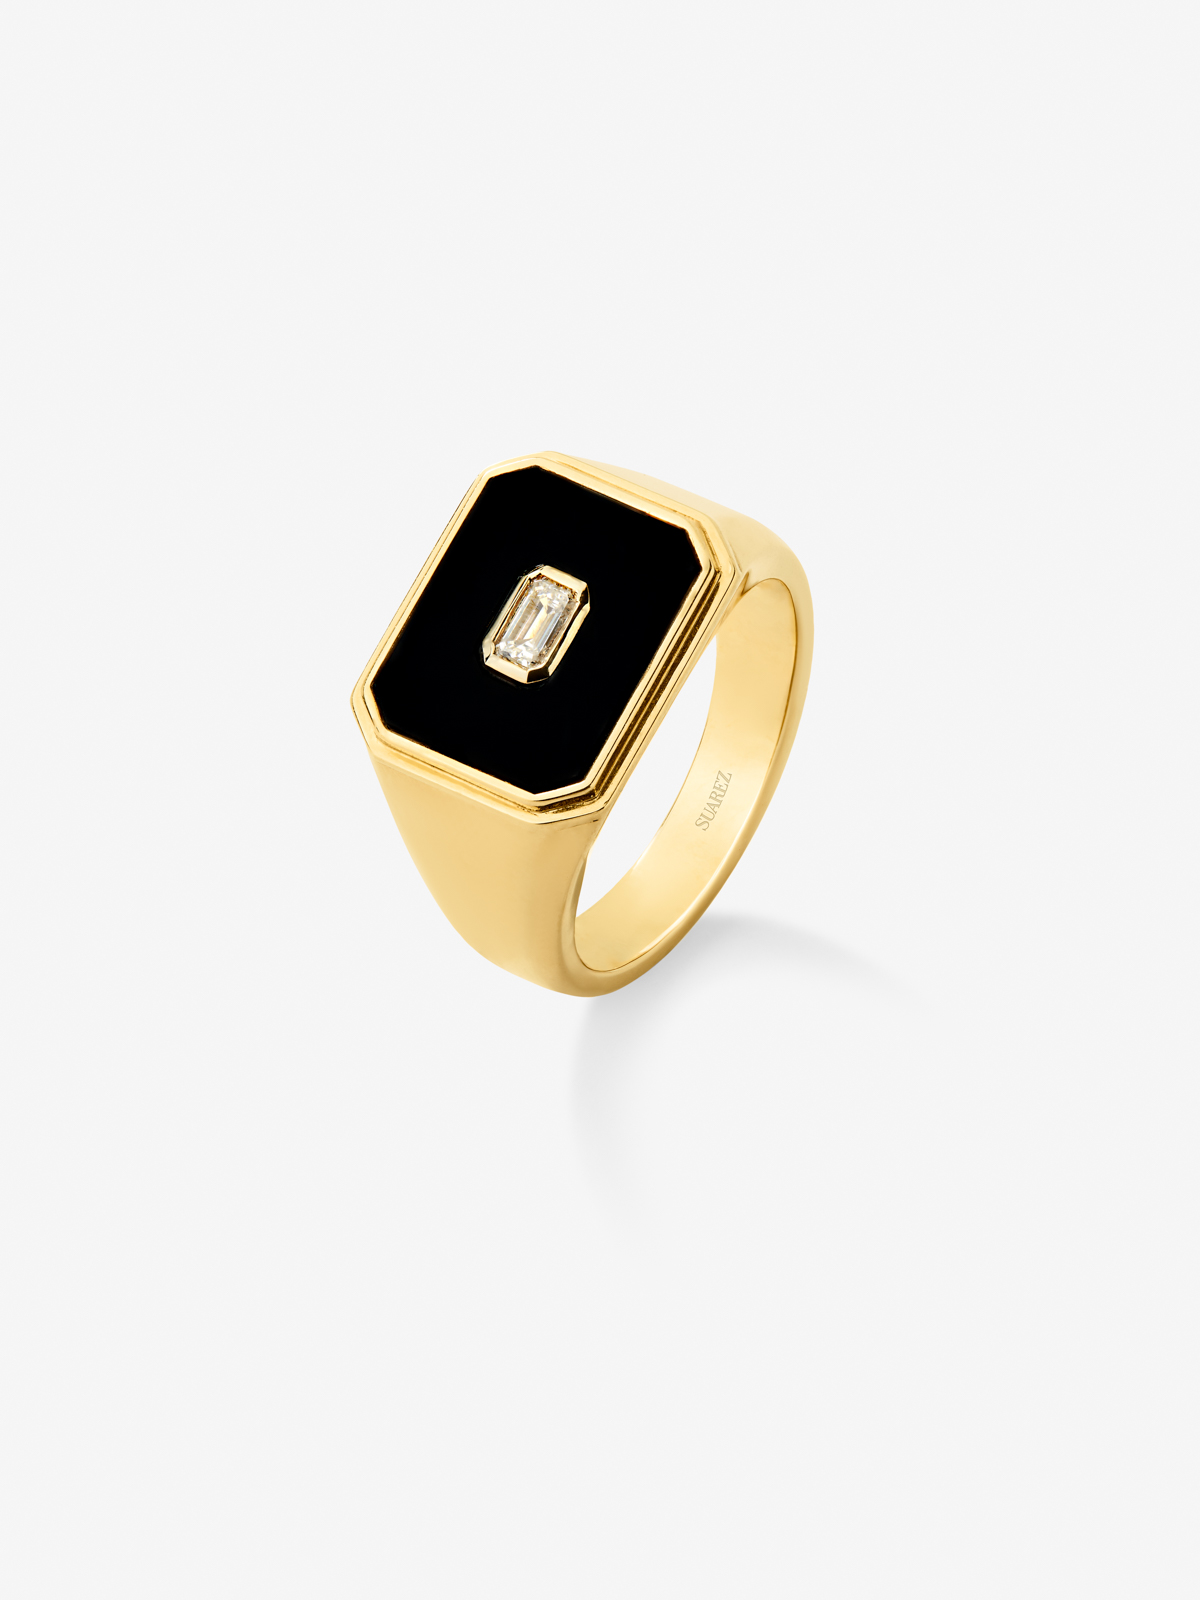 18K yellow golden seal ring with black and white diamond of 0.17 cts